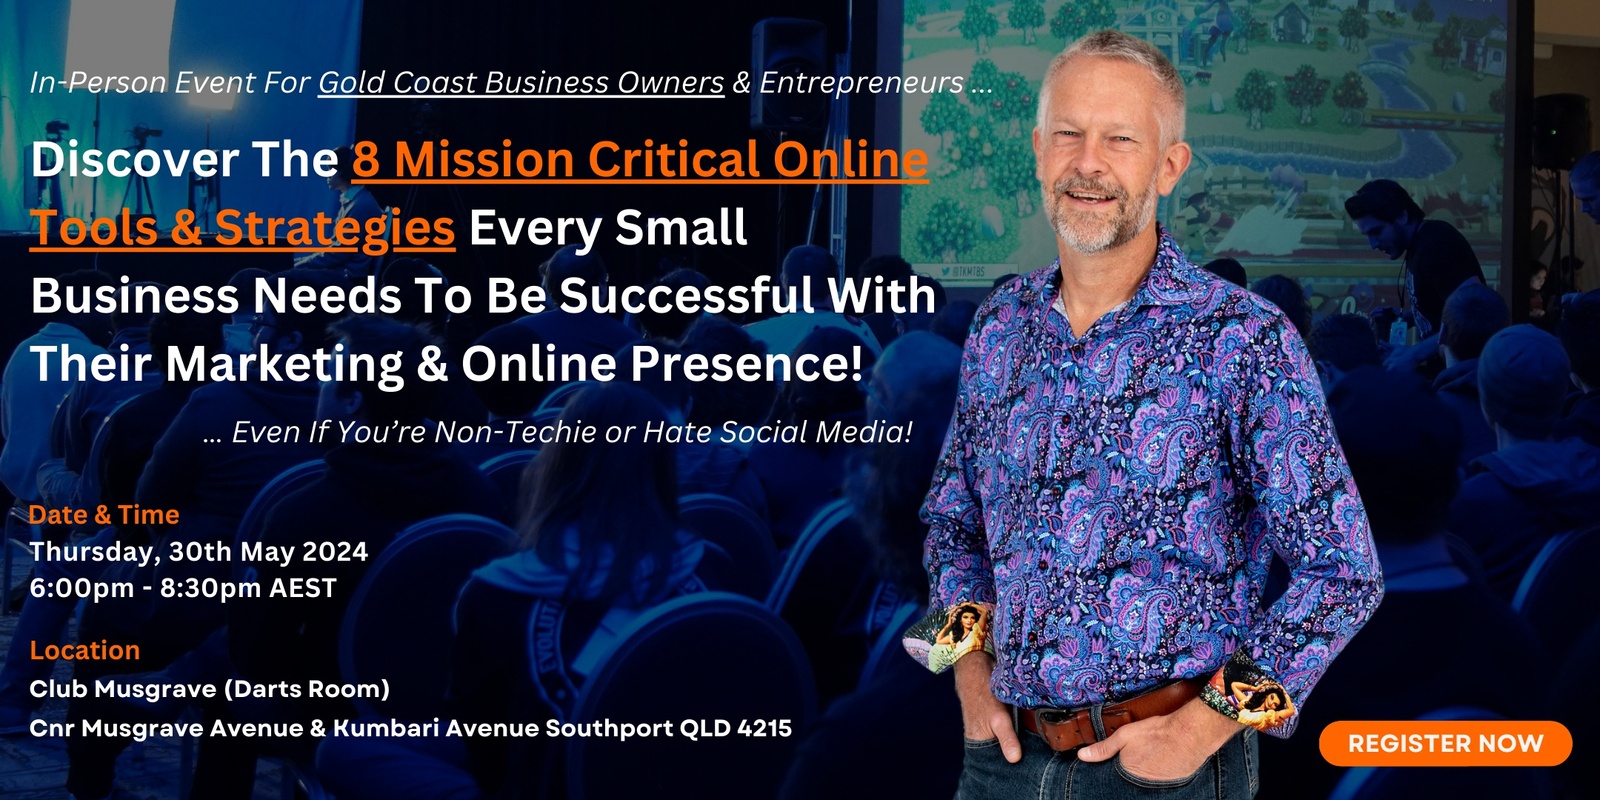 Banner image for Discover The 8 Mission Critical Online Tools & Strategies Every Small Business Needs To Be Successful With Their Marketing & Online Presence!